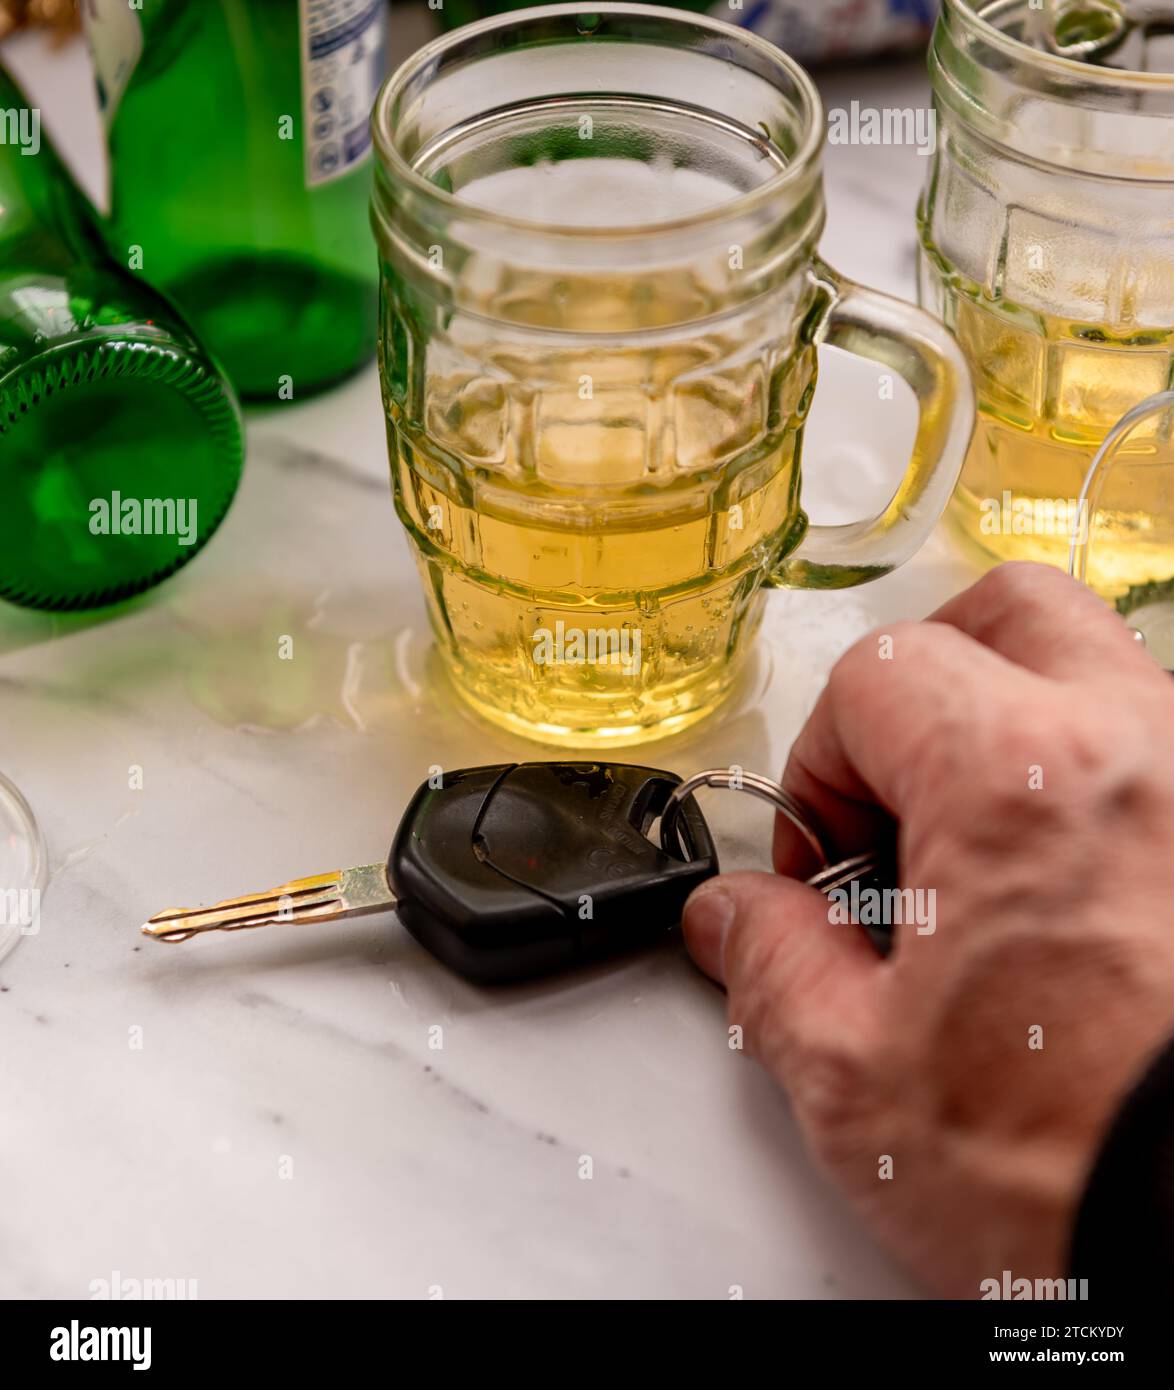 A drink drive concept with a table full of alcoholic drinks and a person picking up a set of car keys to drive. Stock Photo